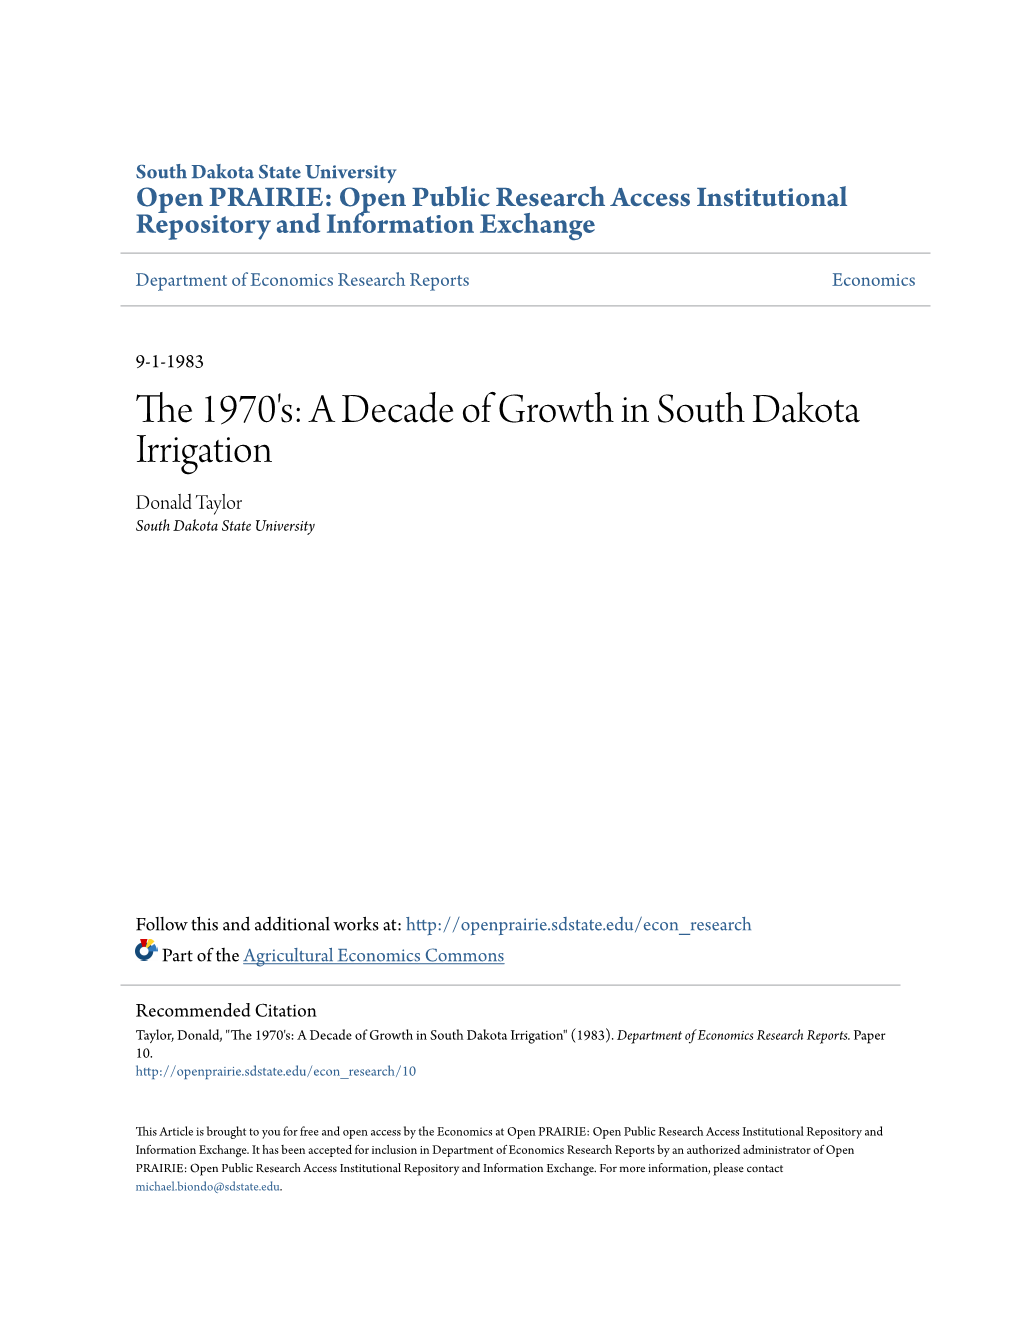 The 1970'S: a Decade of Growth in South Dakota Irrigation Donald Taylor South Dakota State University